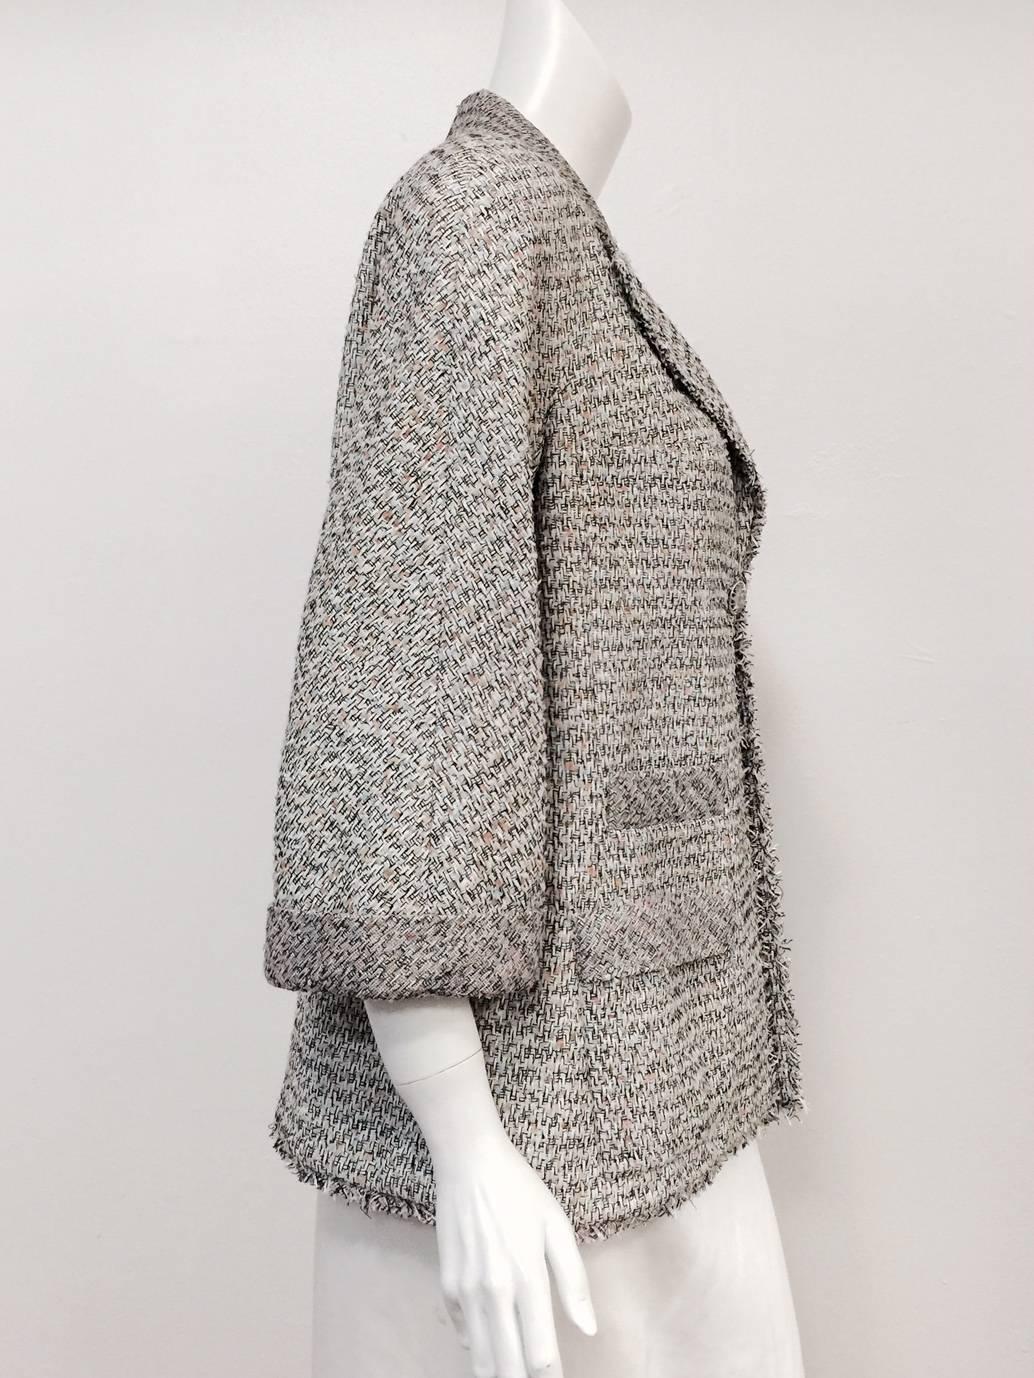 Chanel Spring Tweed Jacket With Rolled Cuffs and Frayed Hem is a wonderful addition to any collection celebrating all things Coco!  Features signature tweed in shades of pink, sky, sage, cream and black.  Raglan sleeves, notched lapel and single